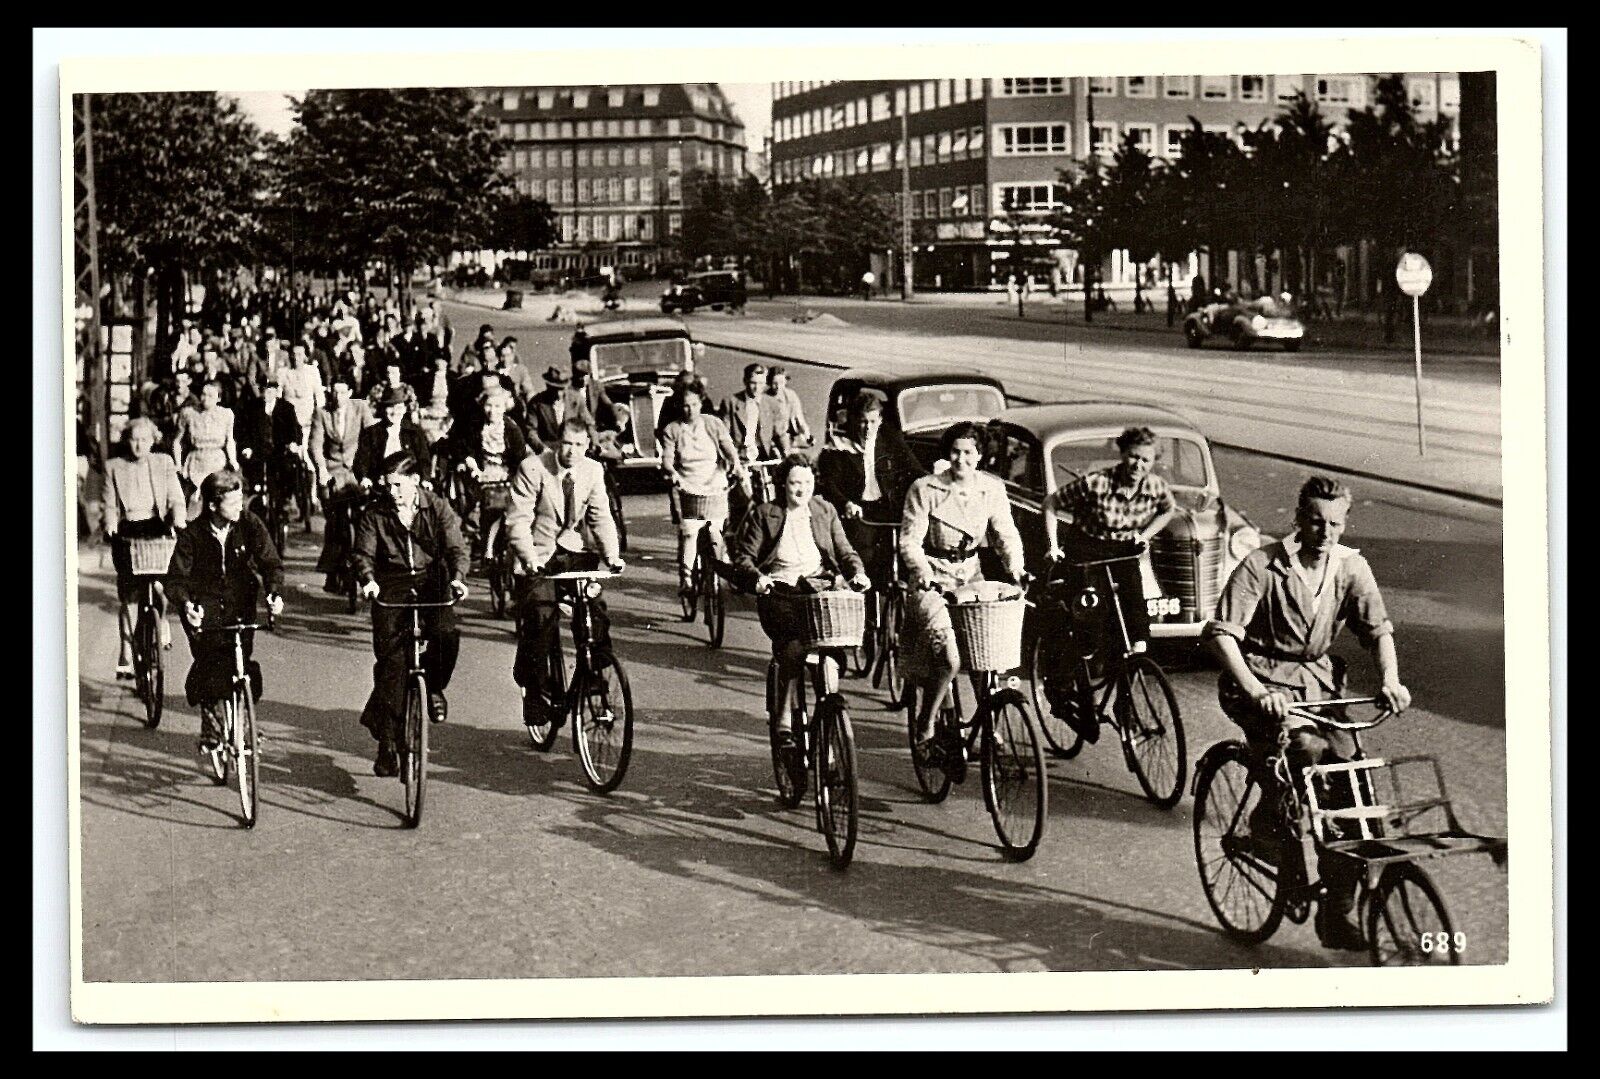 Copenhagen Denmark The City of Bicycles Postcard May 1949 Old Cars       pc284